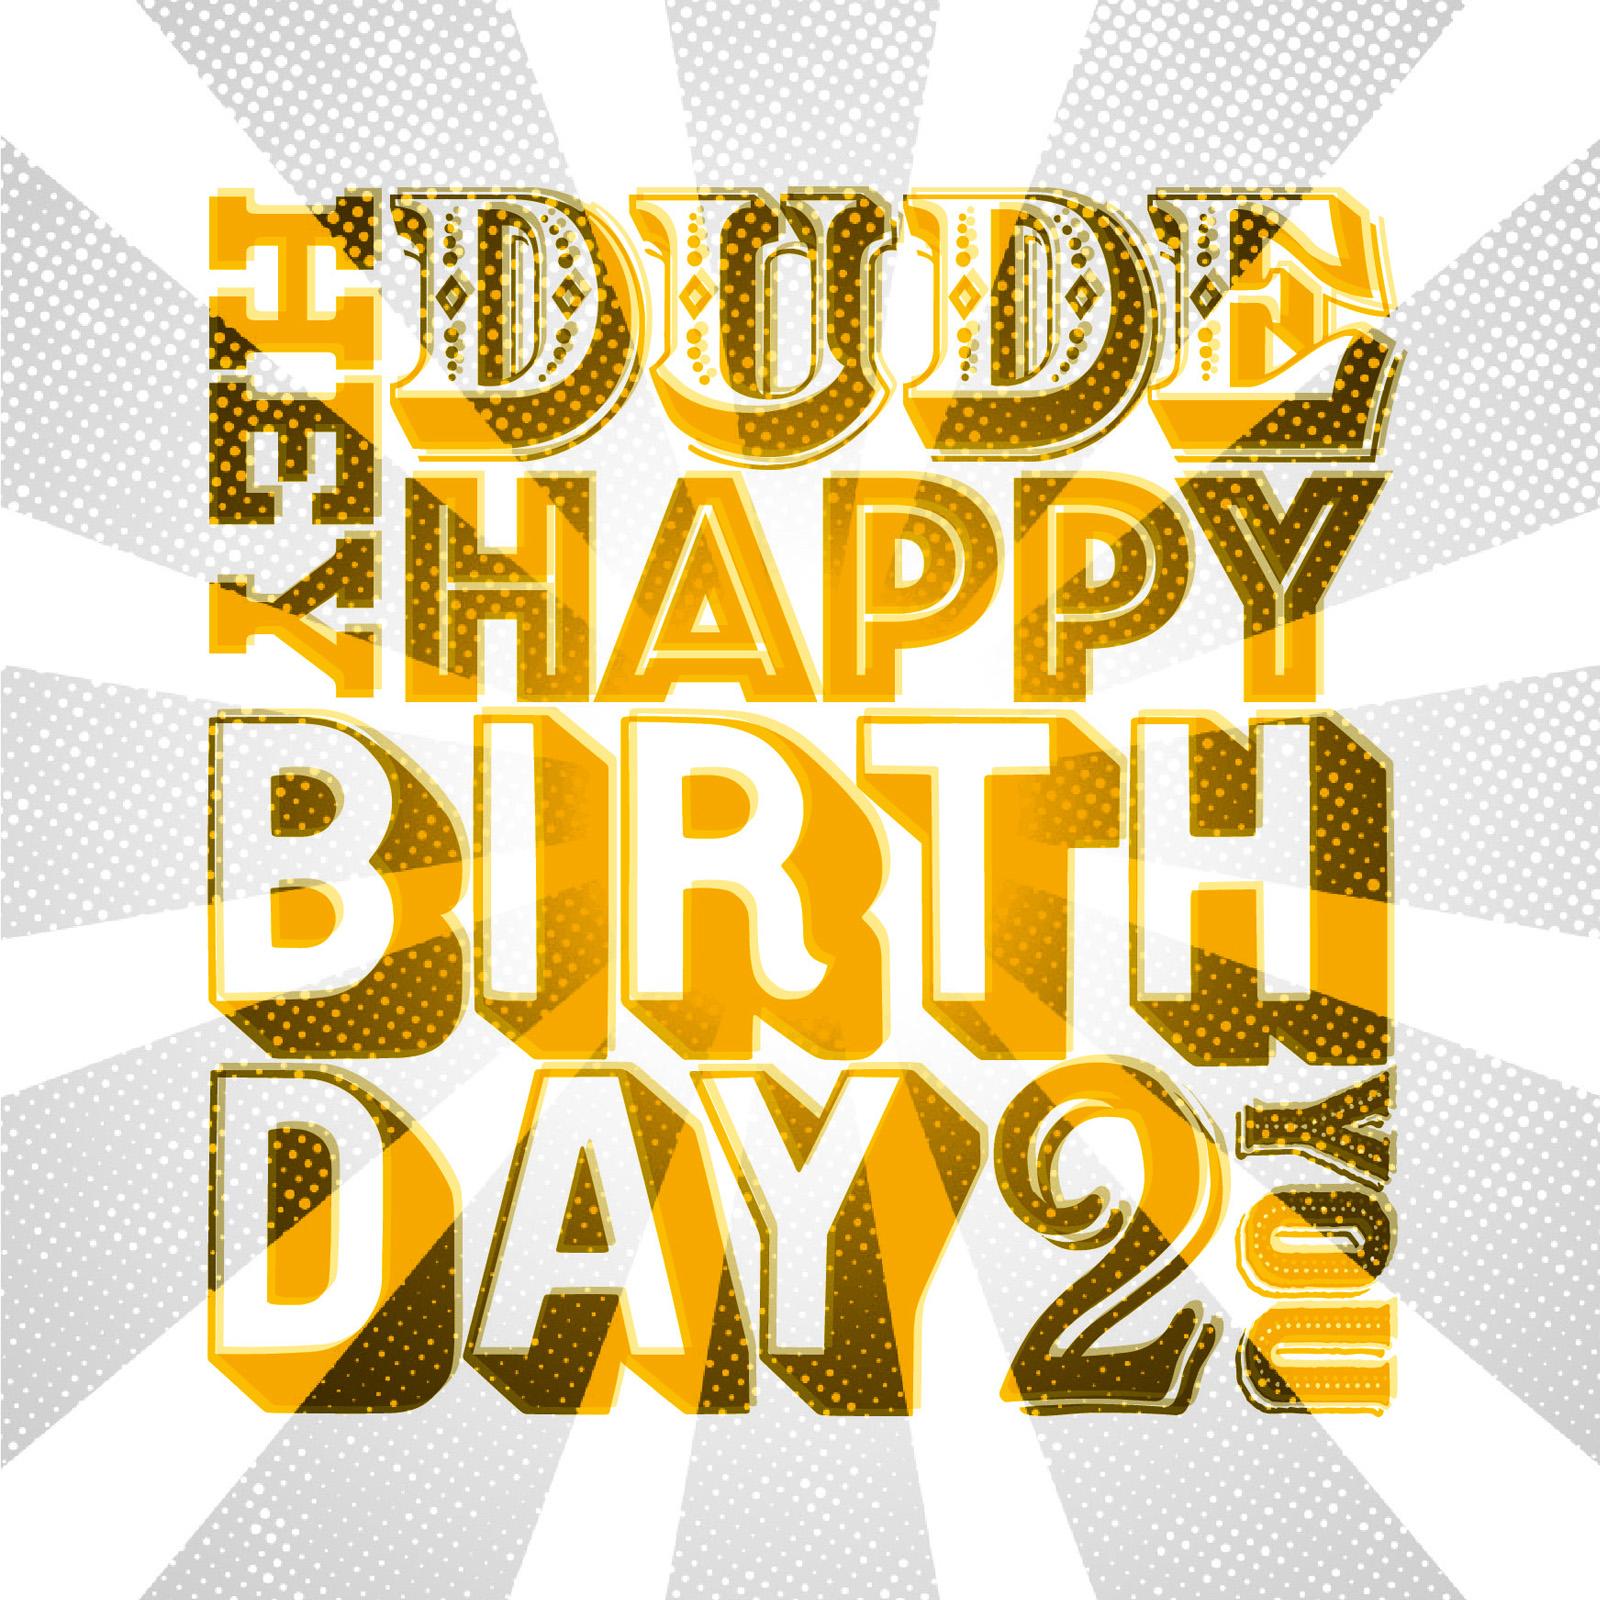 circus-style mix and match typography that reads hey dude happy birthday 2 U in yellow with a grey-coloured distressed starburst background